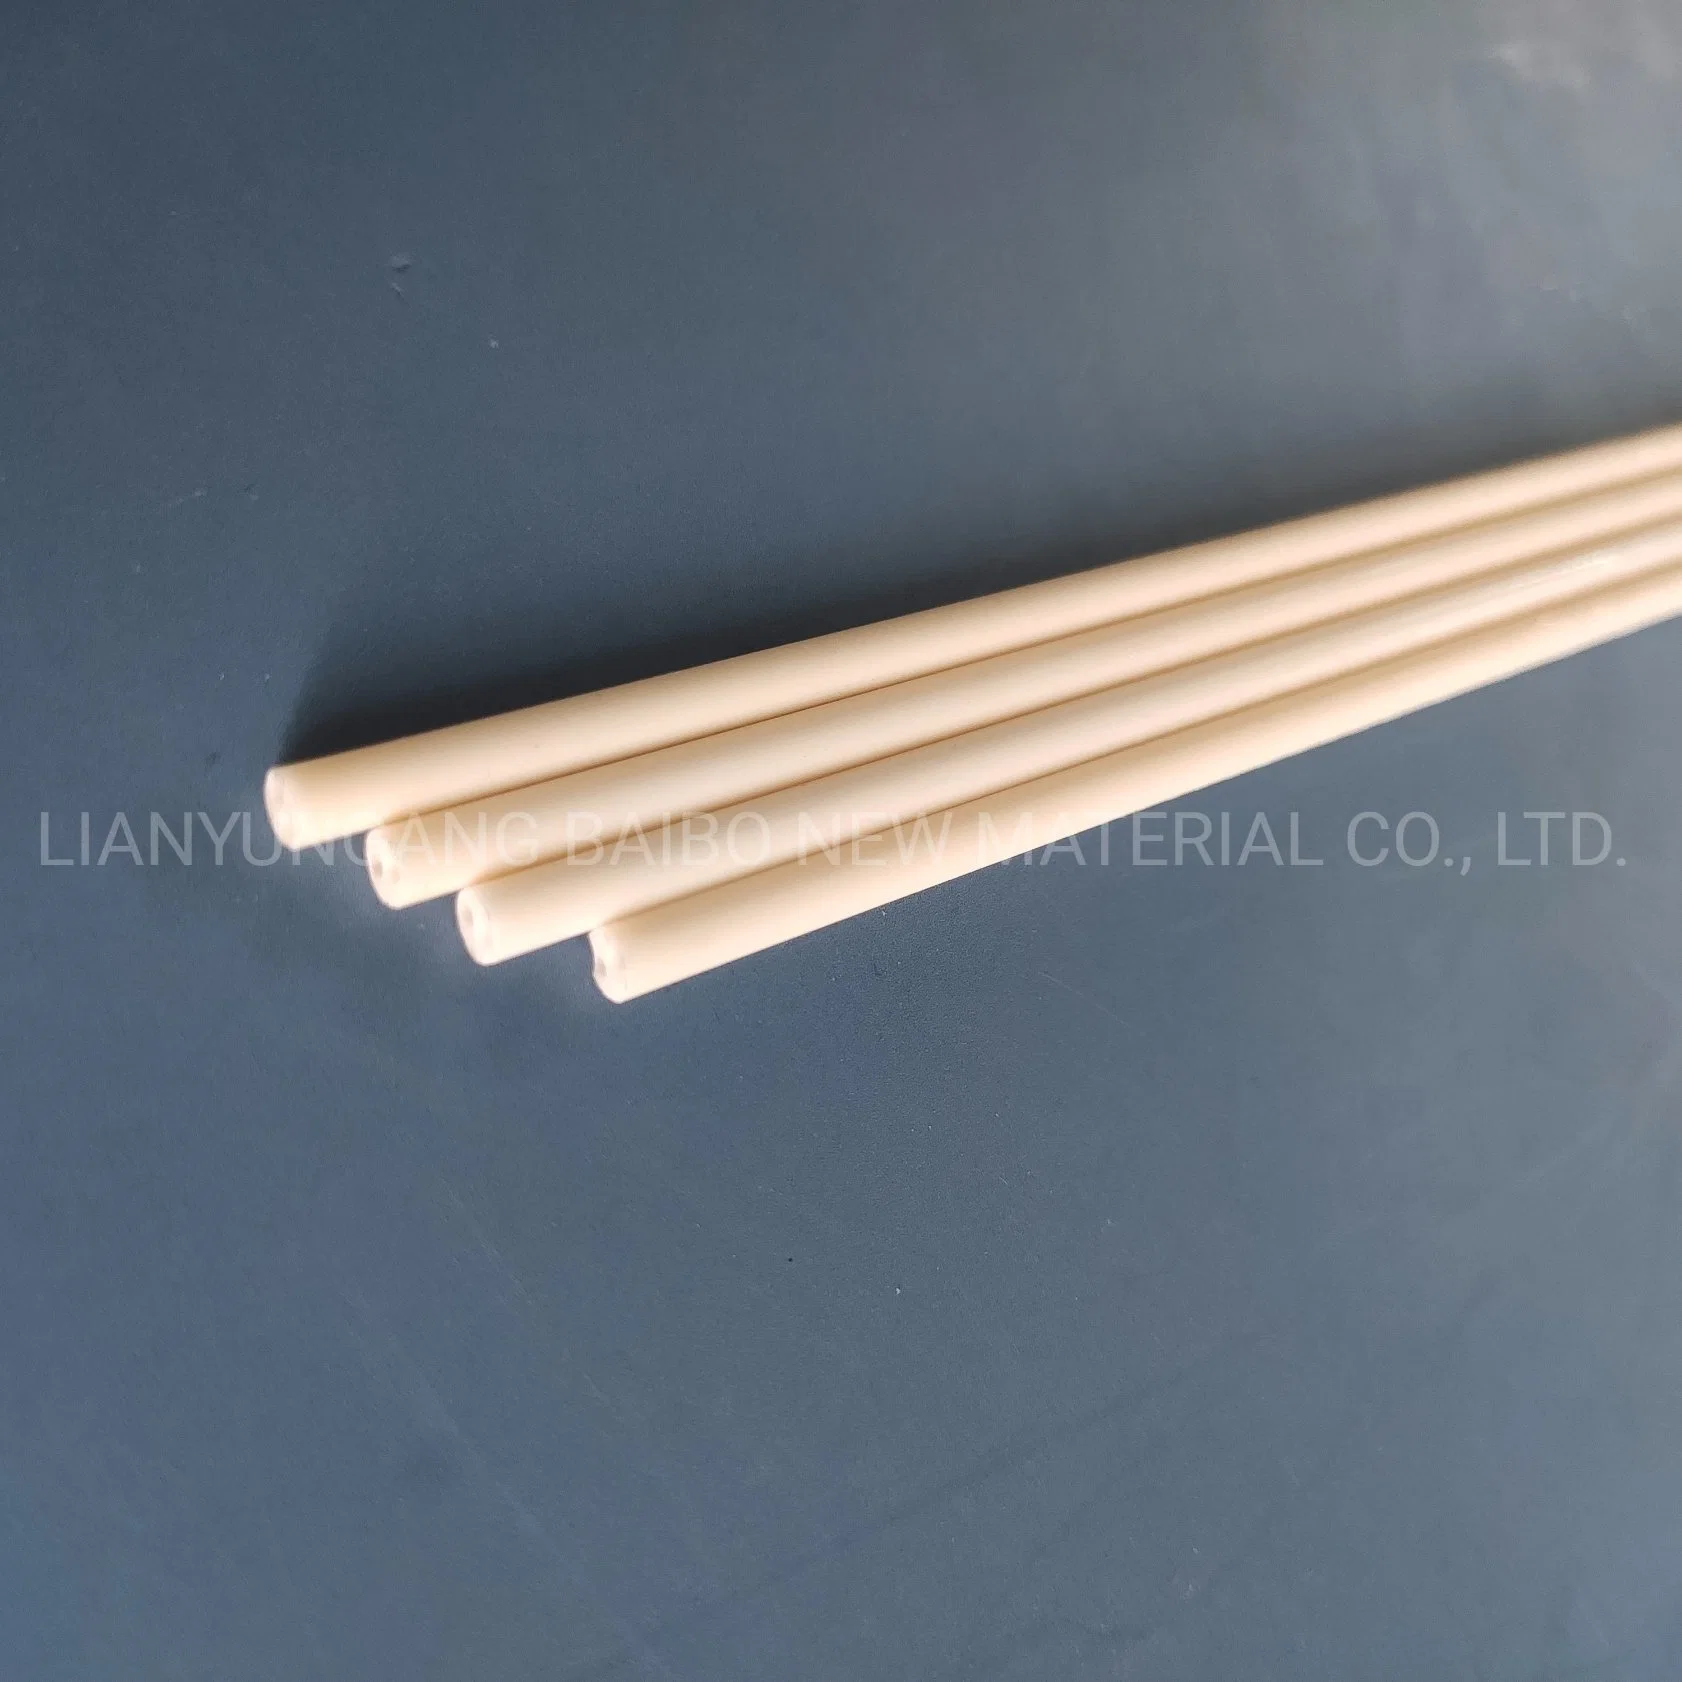 High Temperature Resistance 99% Al2O3 Tubes with Two Holes Alumina Ceramic Insulating Protection Electrical Pipe